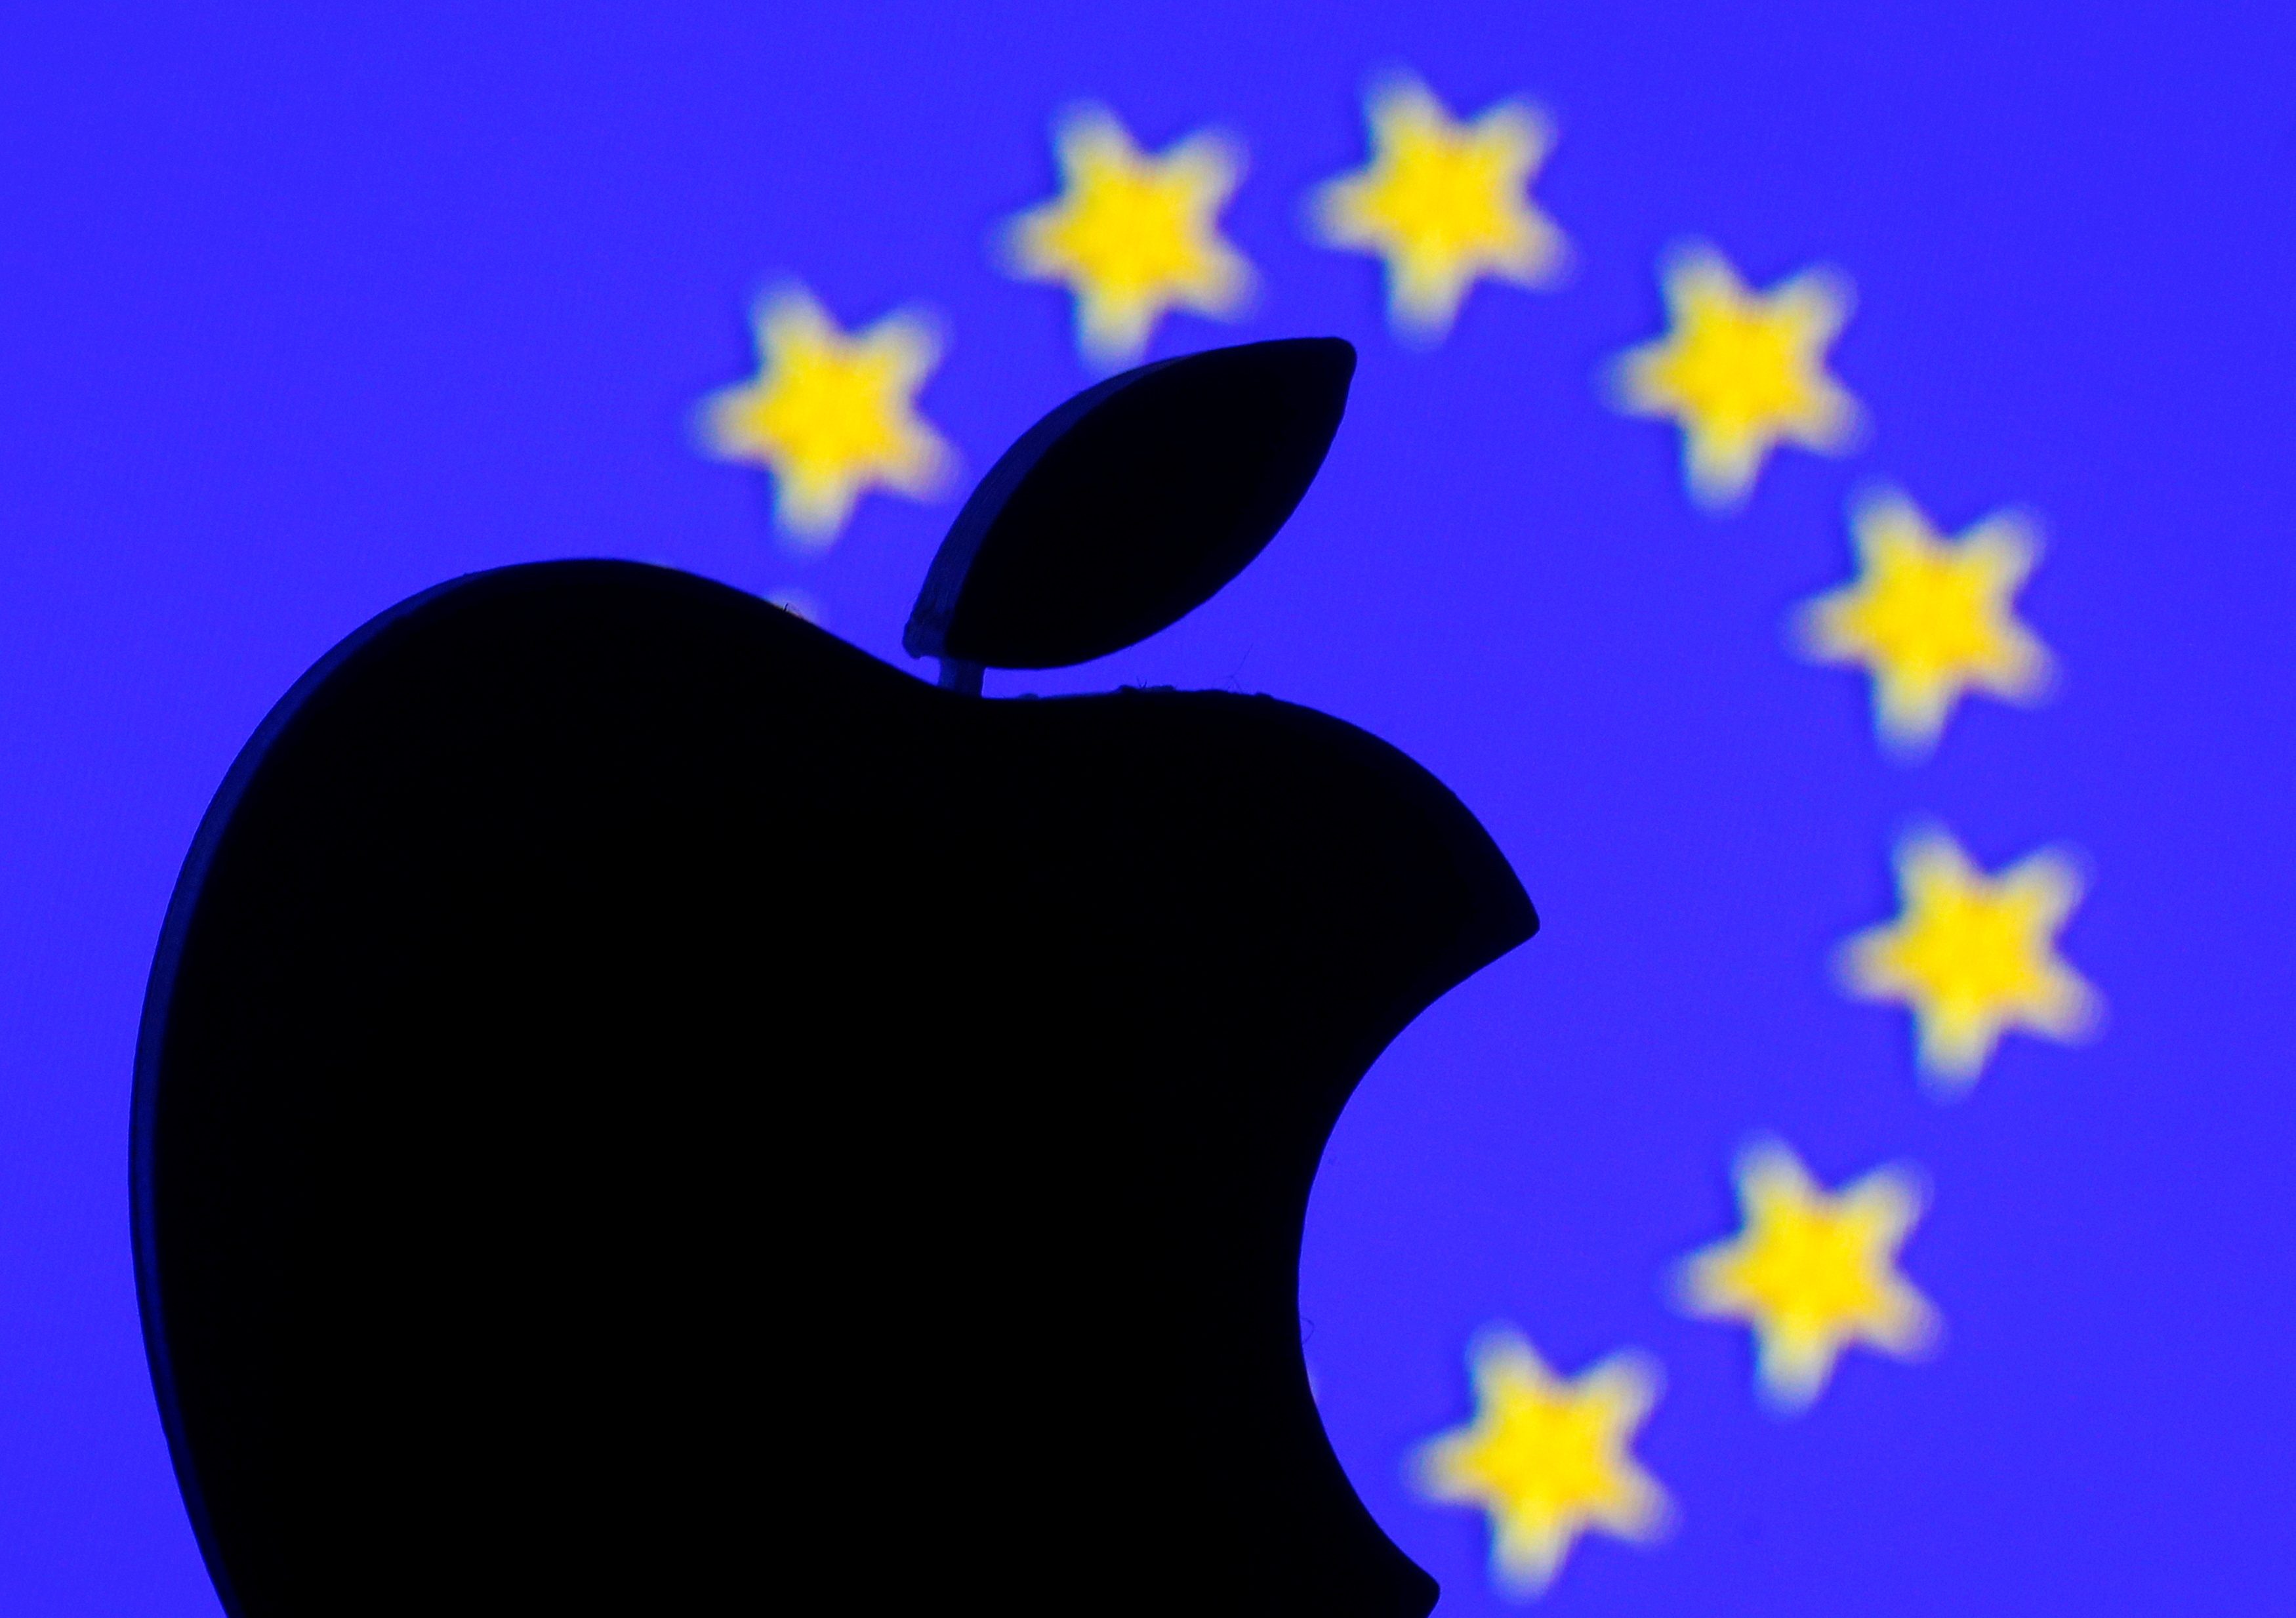 EU to hit Apple with antitrust charge this week –source